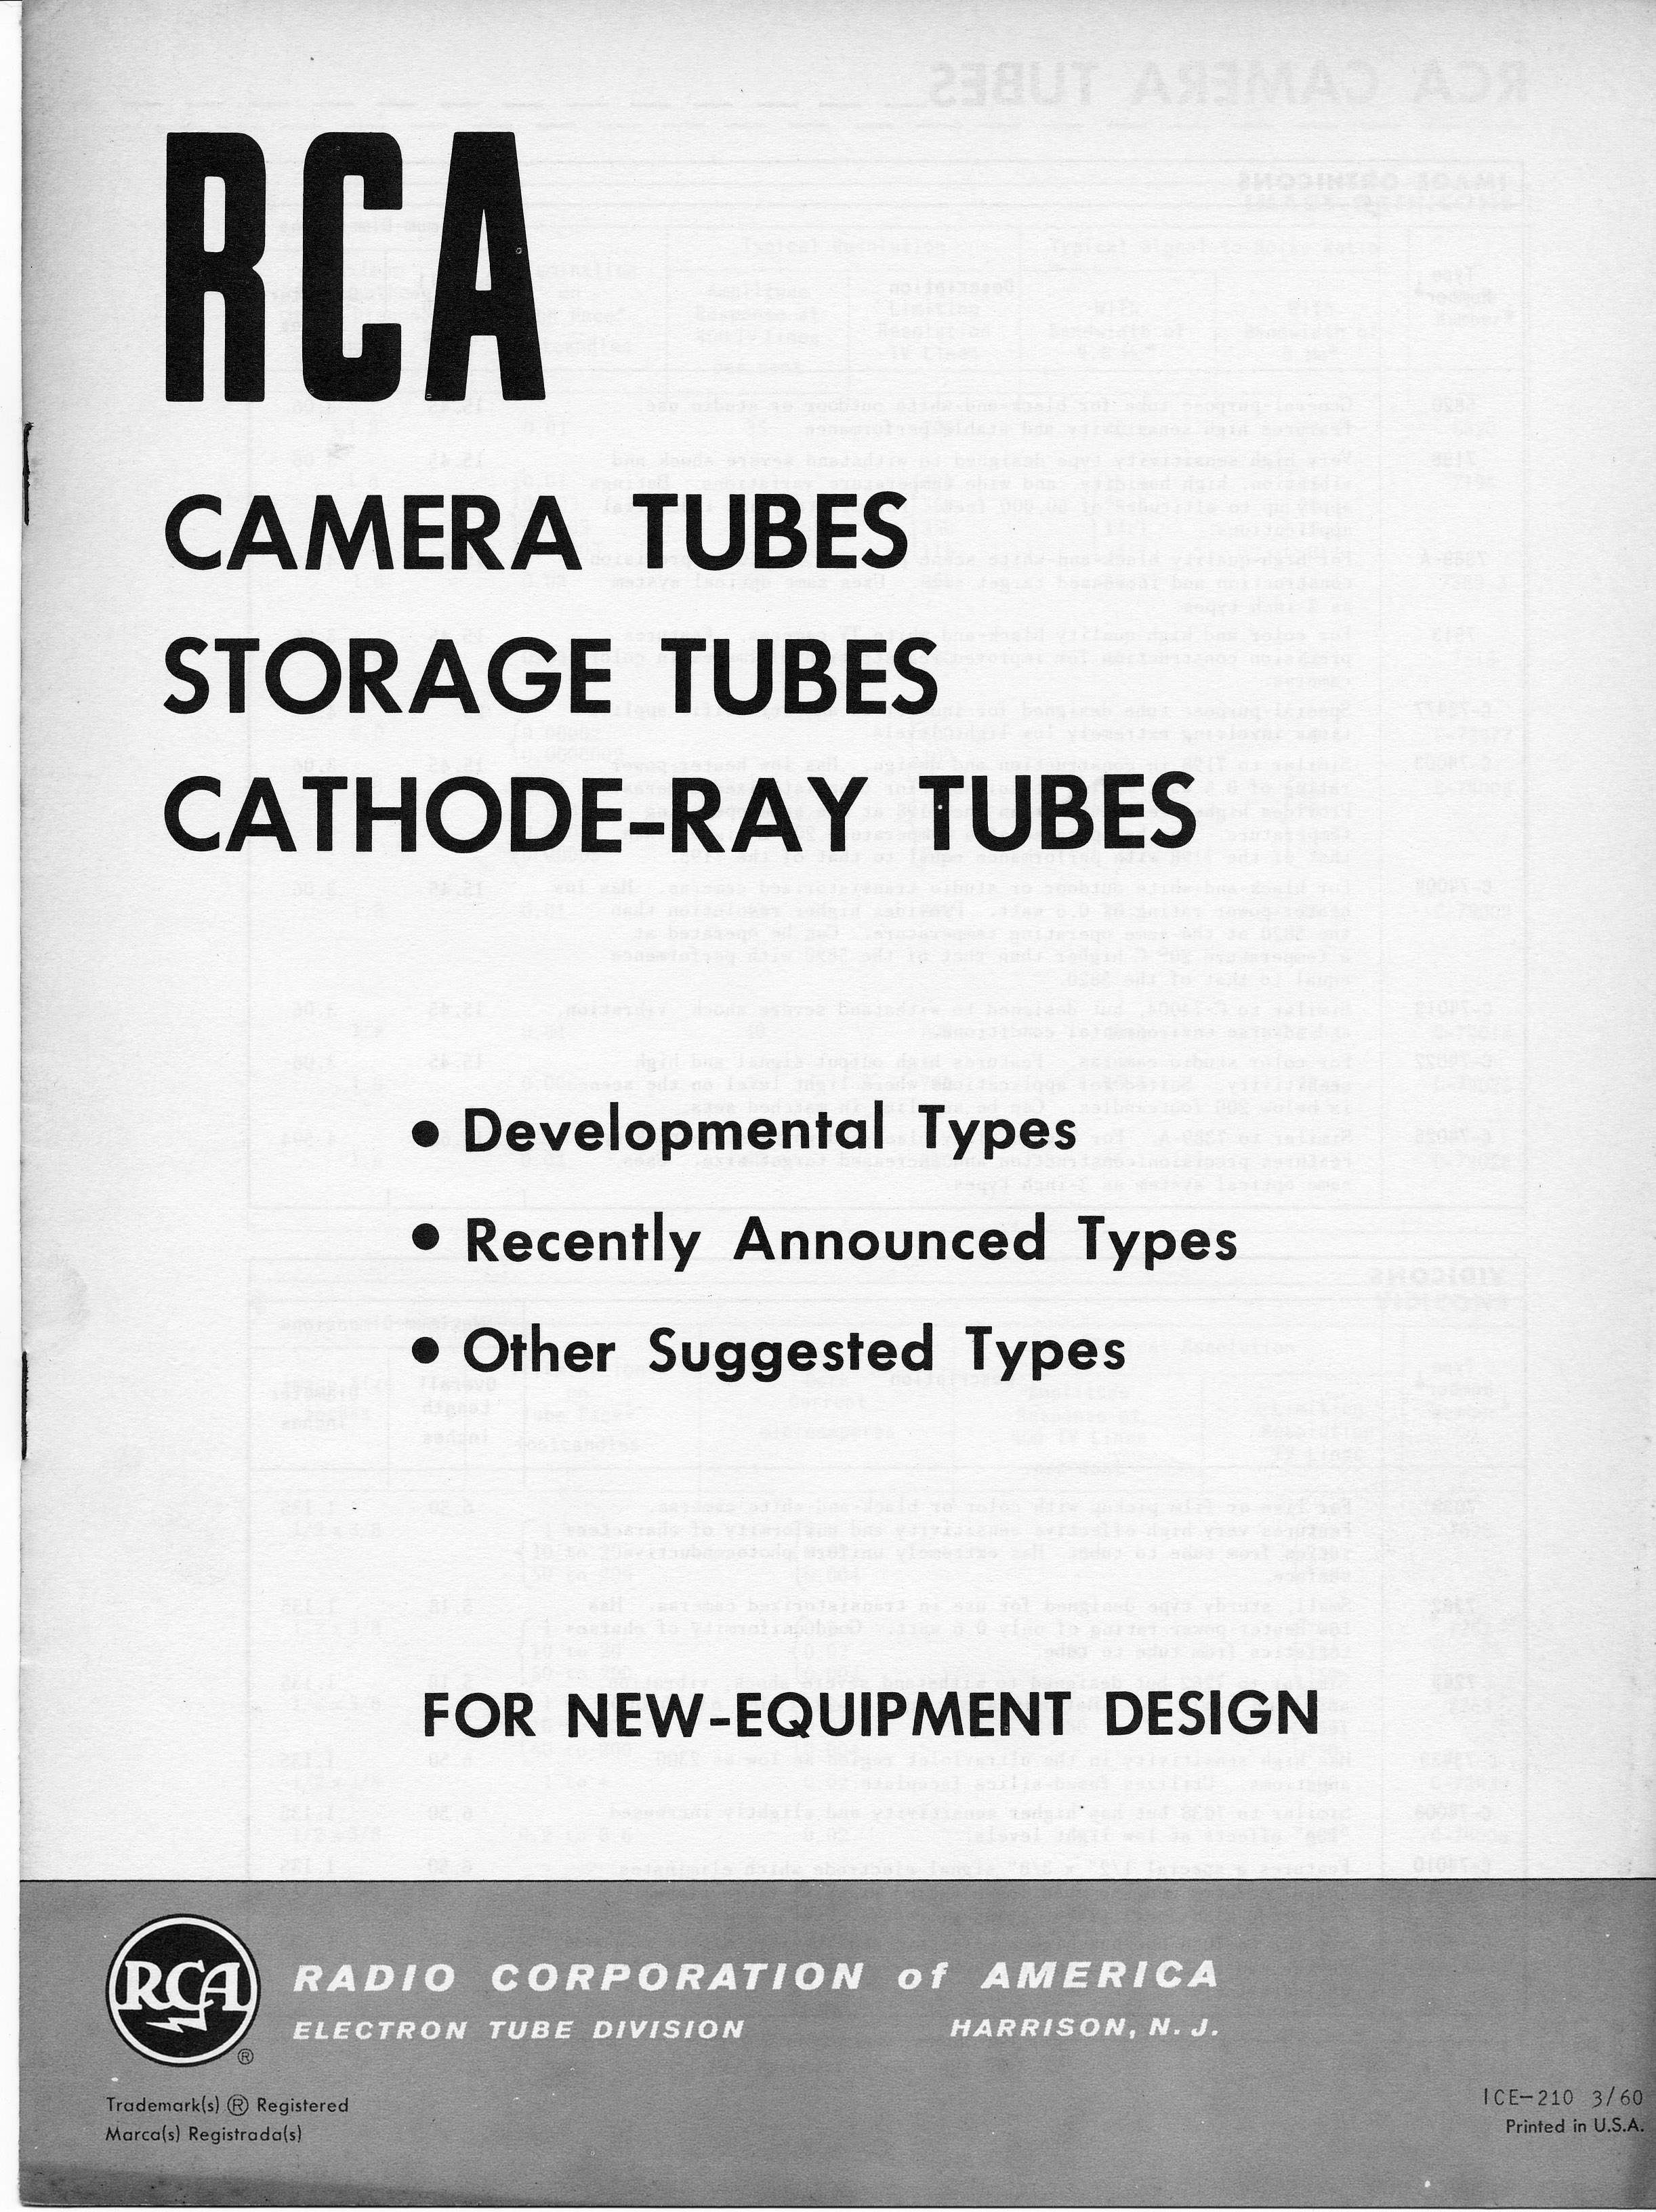 Cover RCA Cathode Ray and Photosensitive Devices Brochure ICE-210 Storage Tubes Only